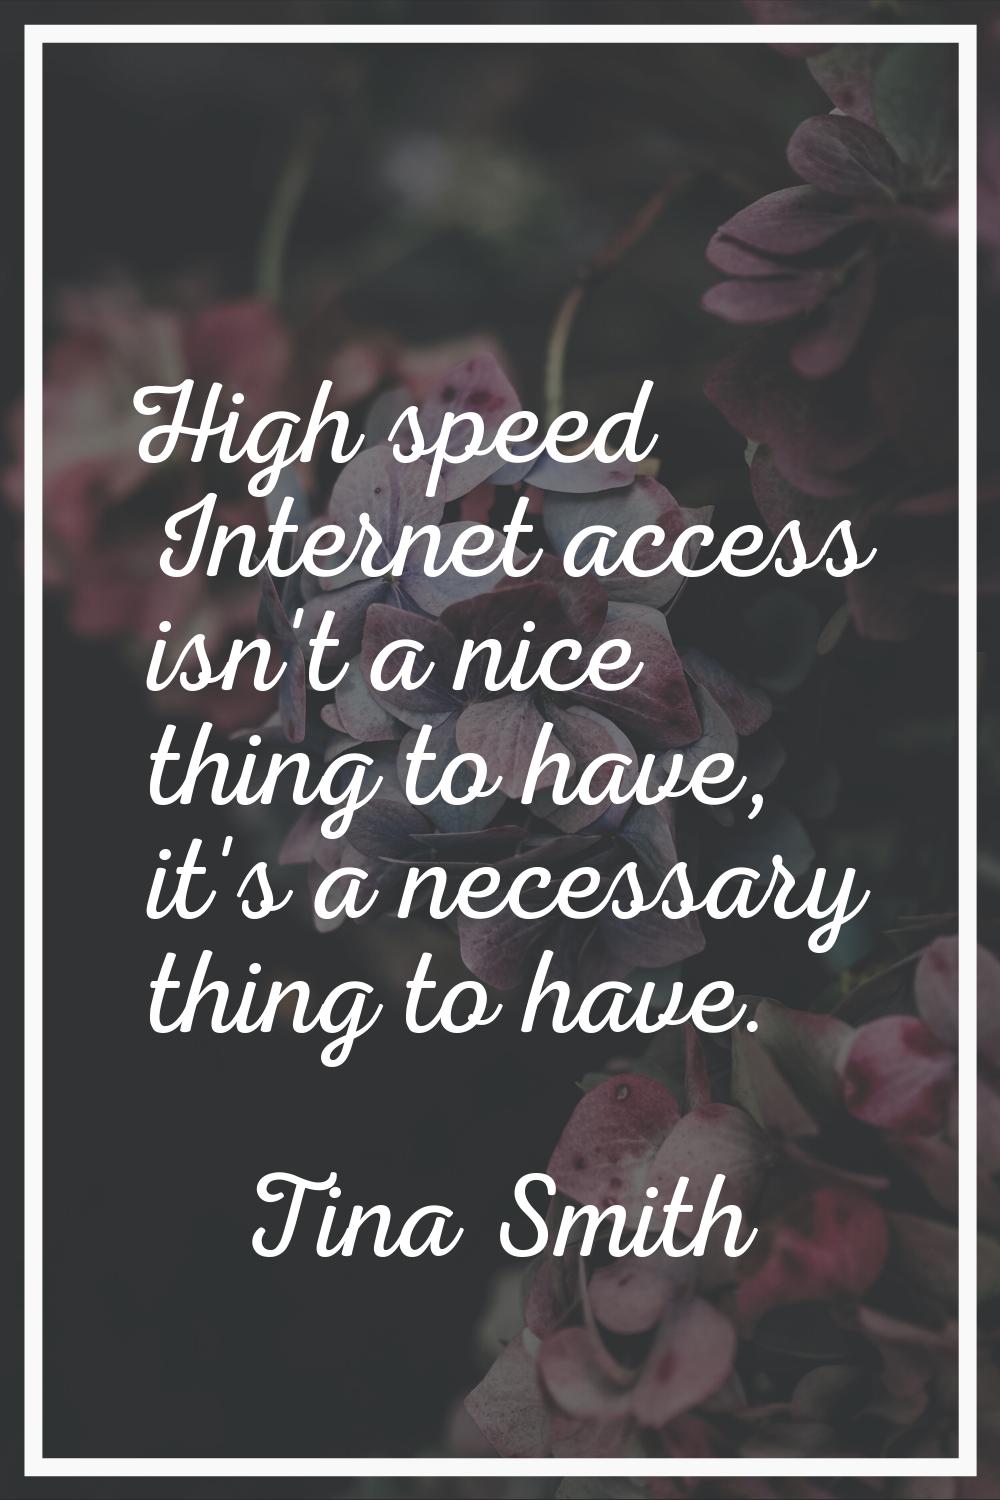 High speed Internet access isn't a nice thing to have, it's a necessary thing to have.